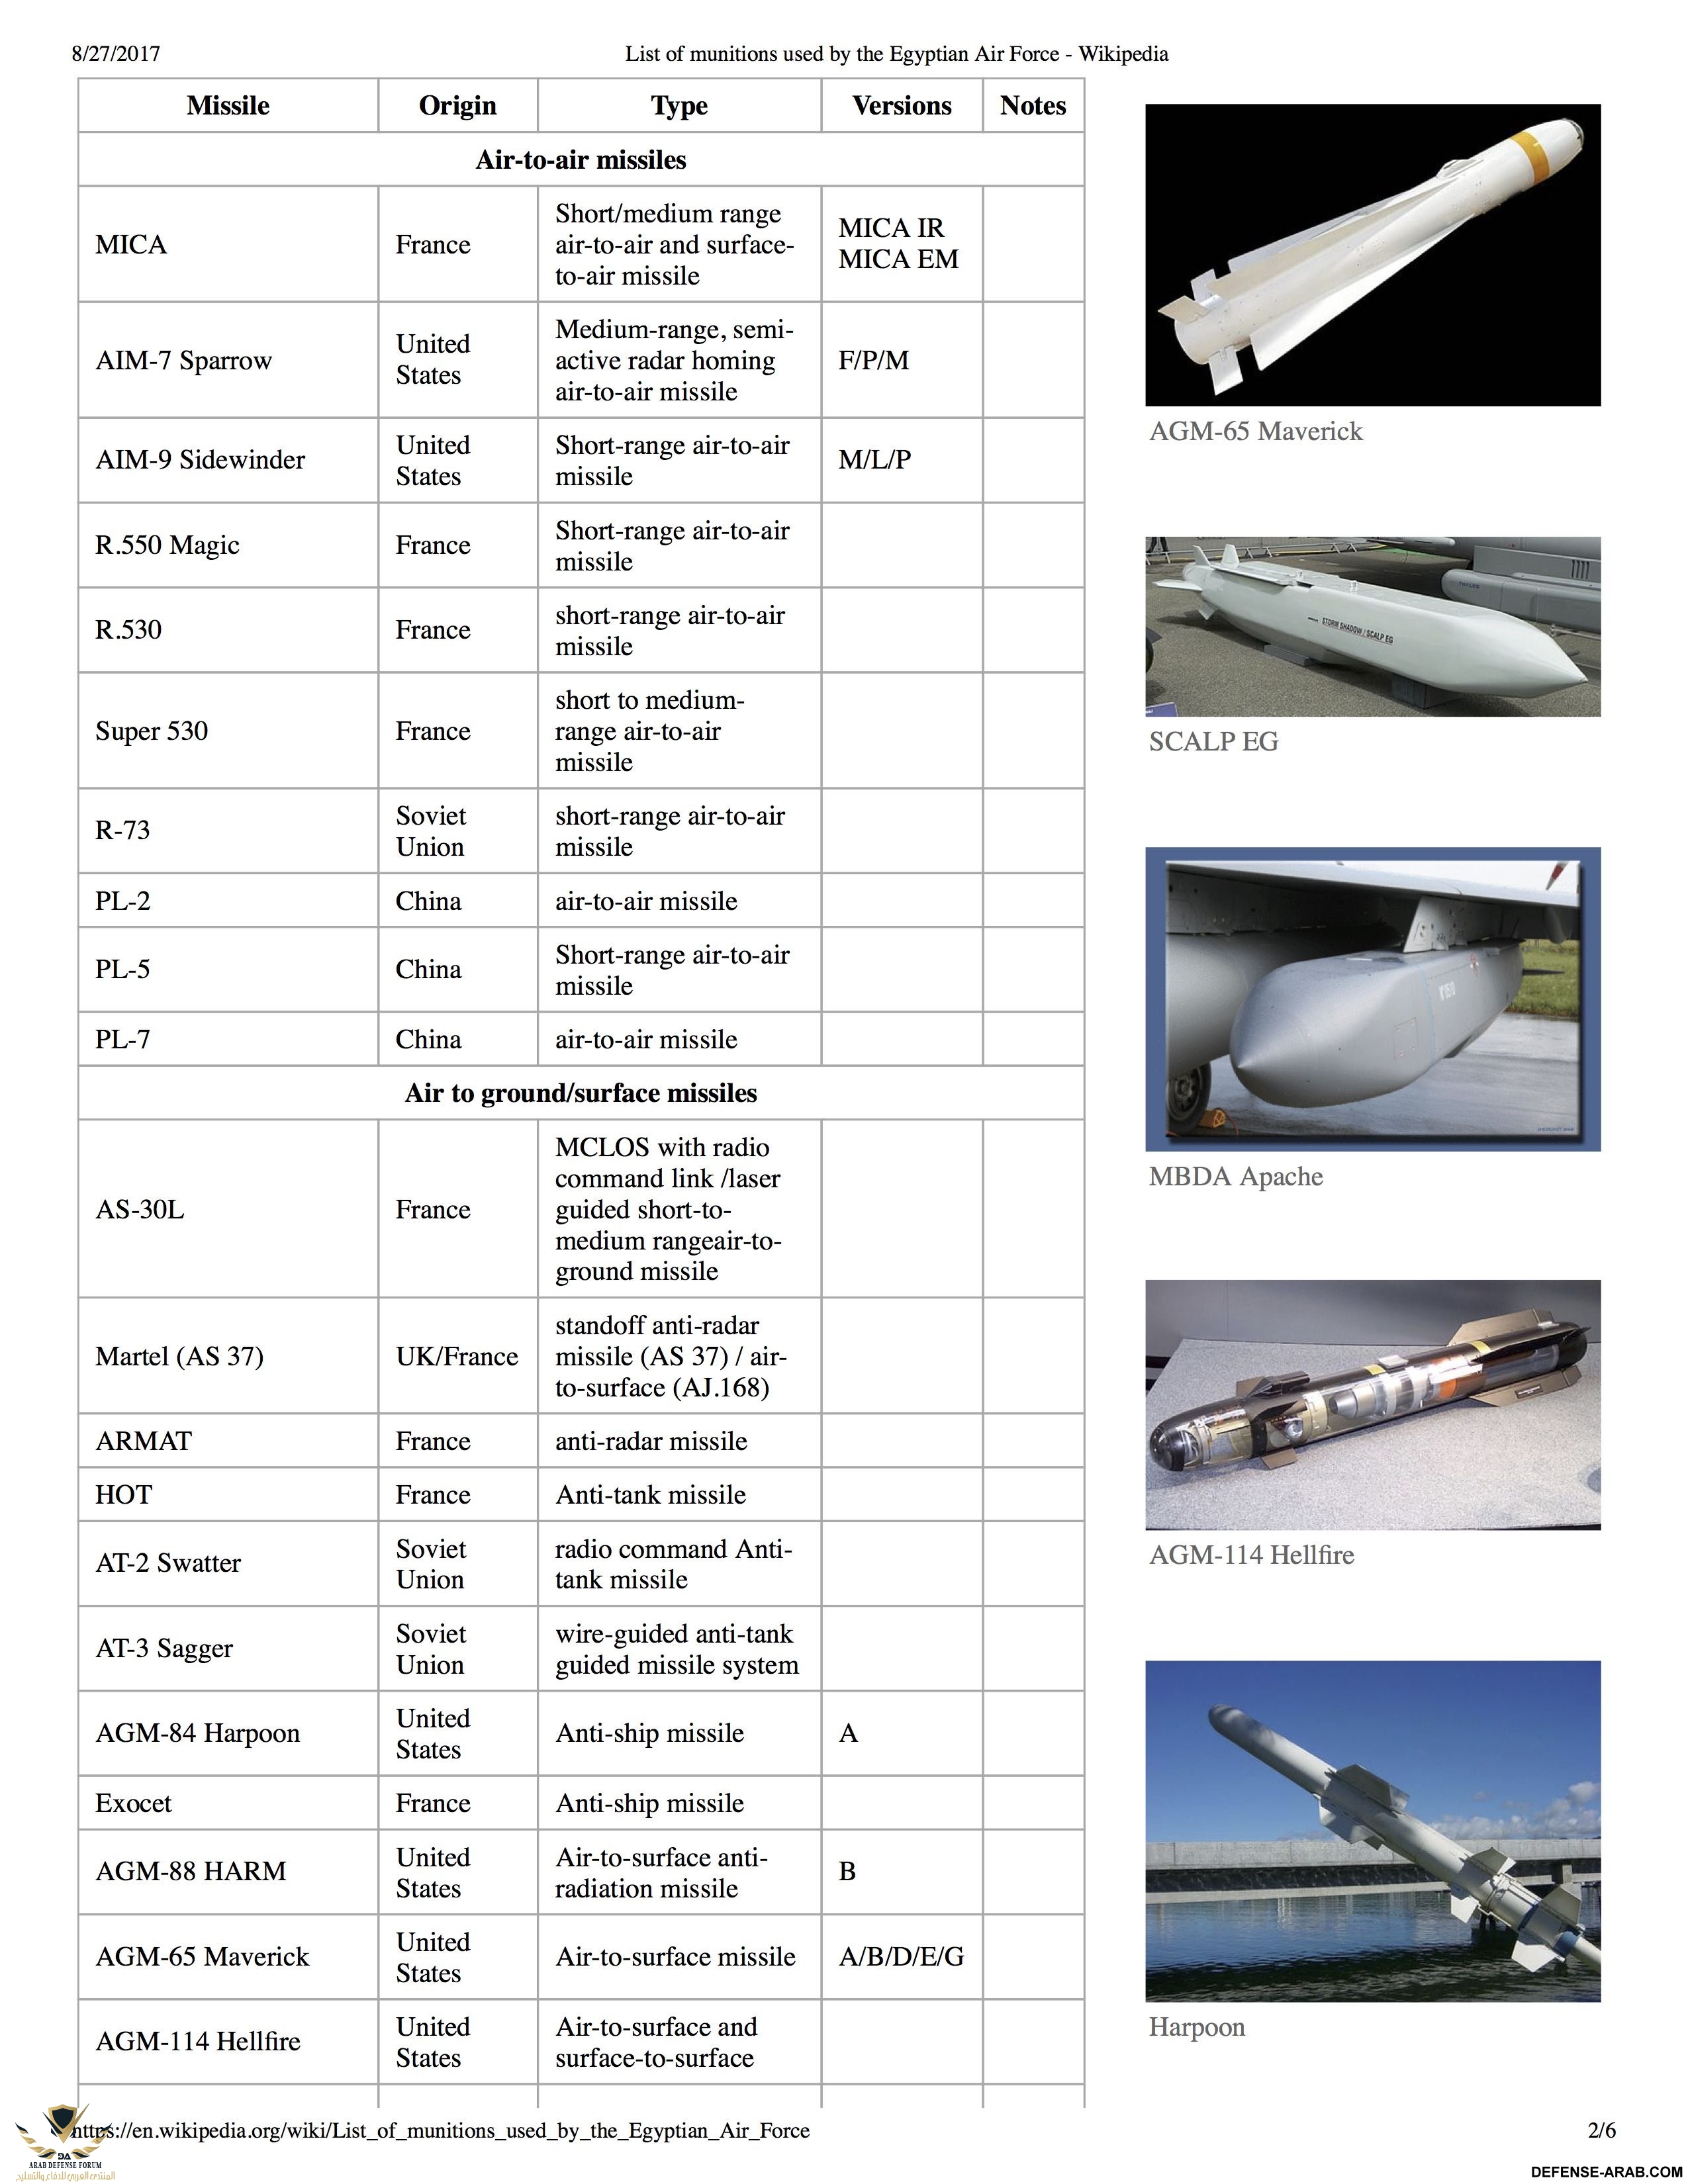 List of munitions used by the Egyptian Air Force - Wikipedia.jpg